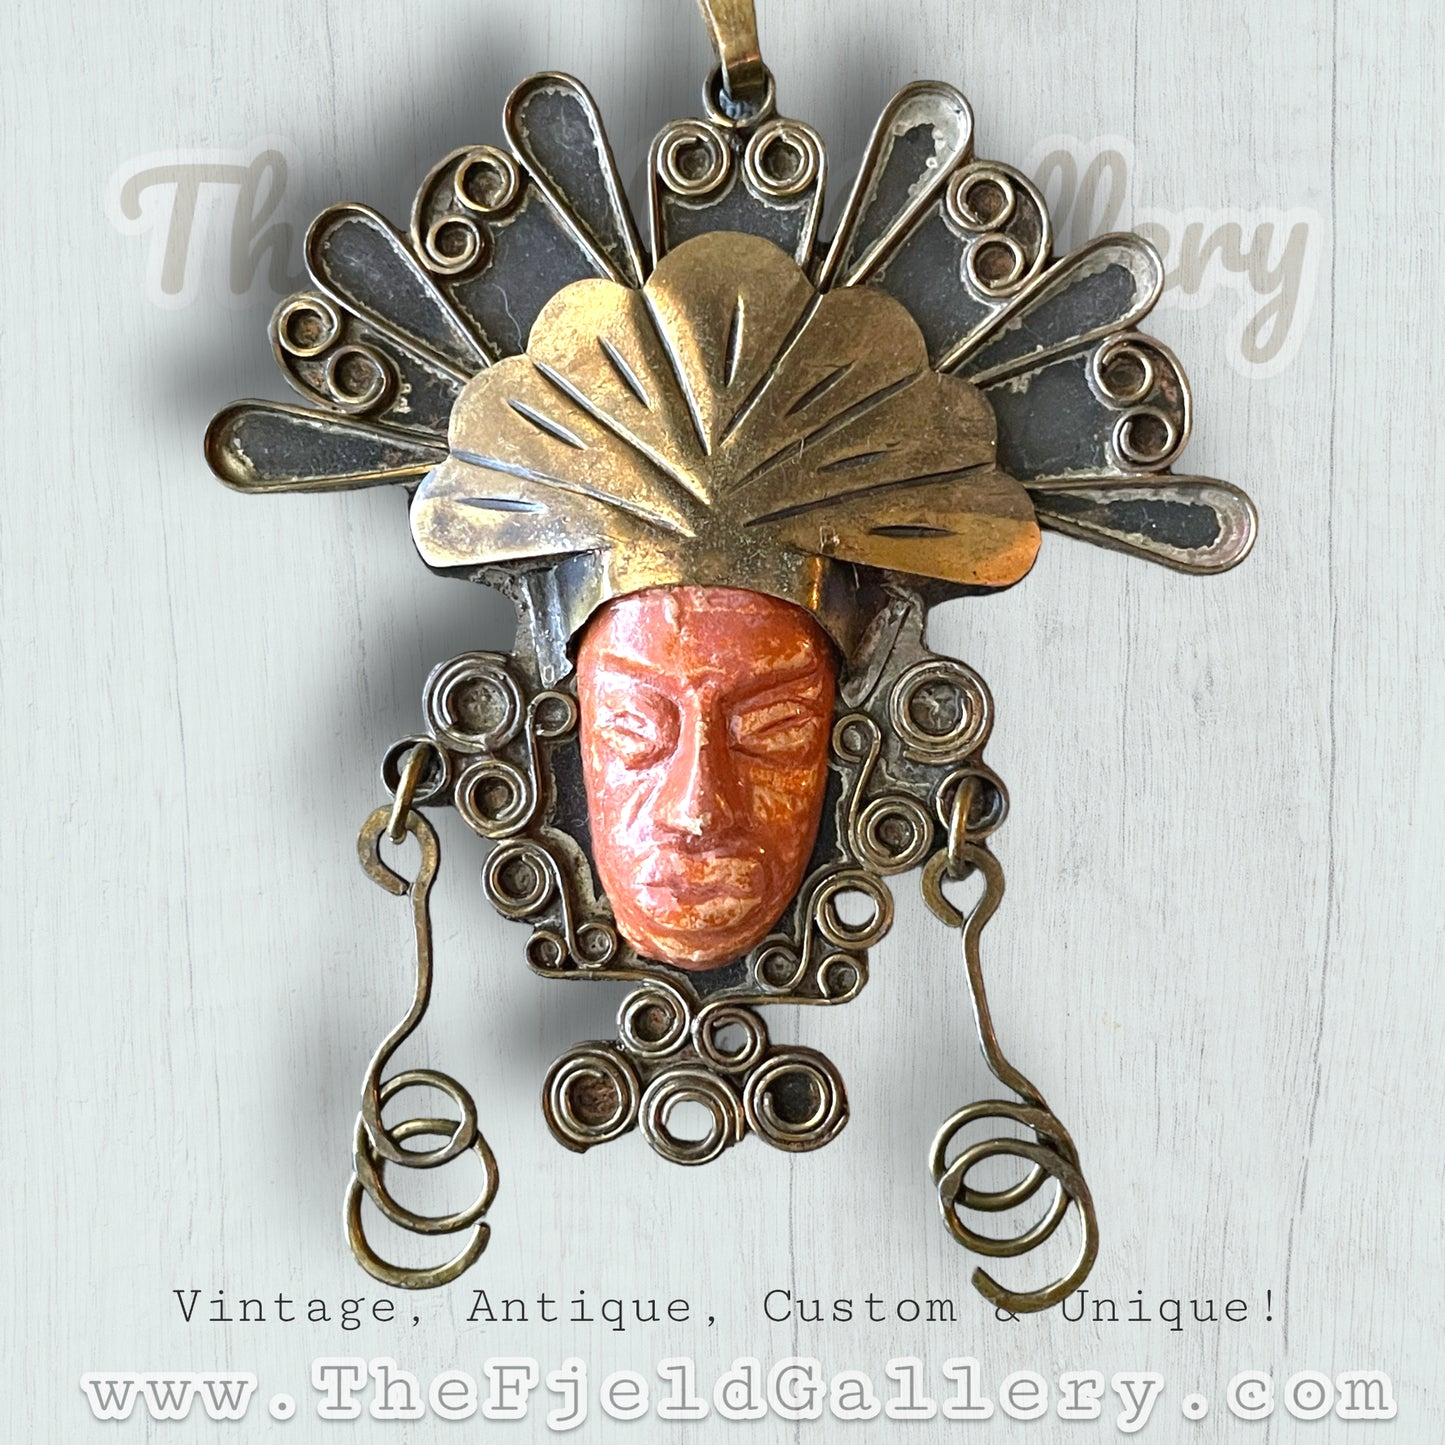 Copper & Brass Orange Stone Carved Face Mask Mexican Necklace